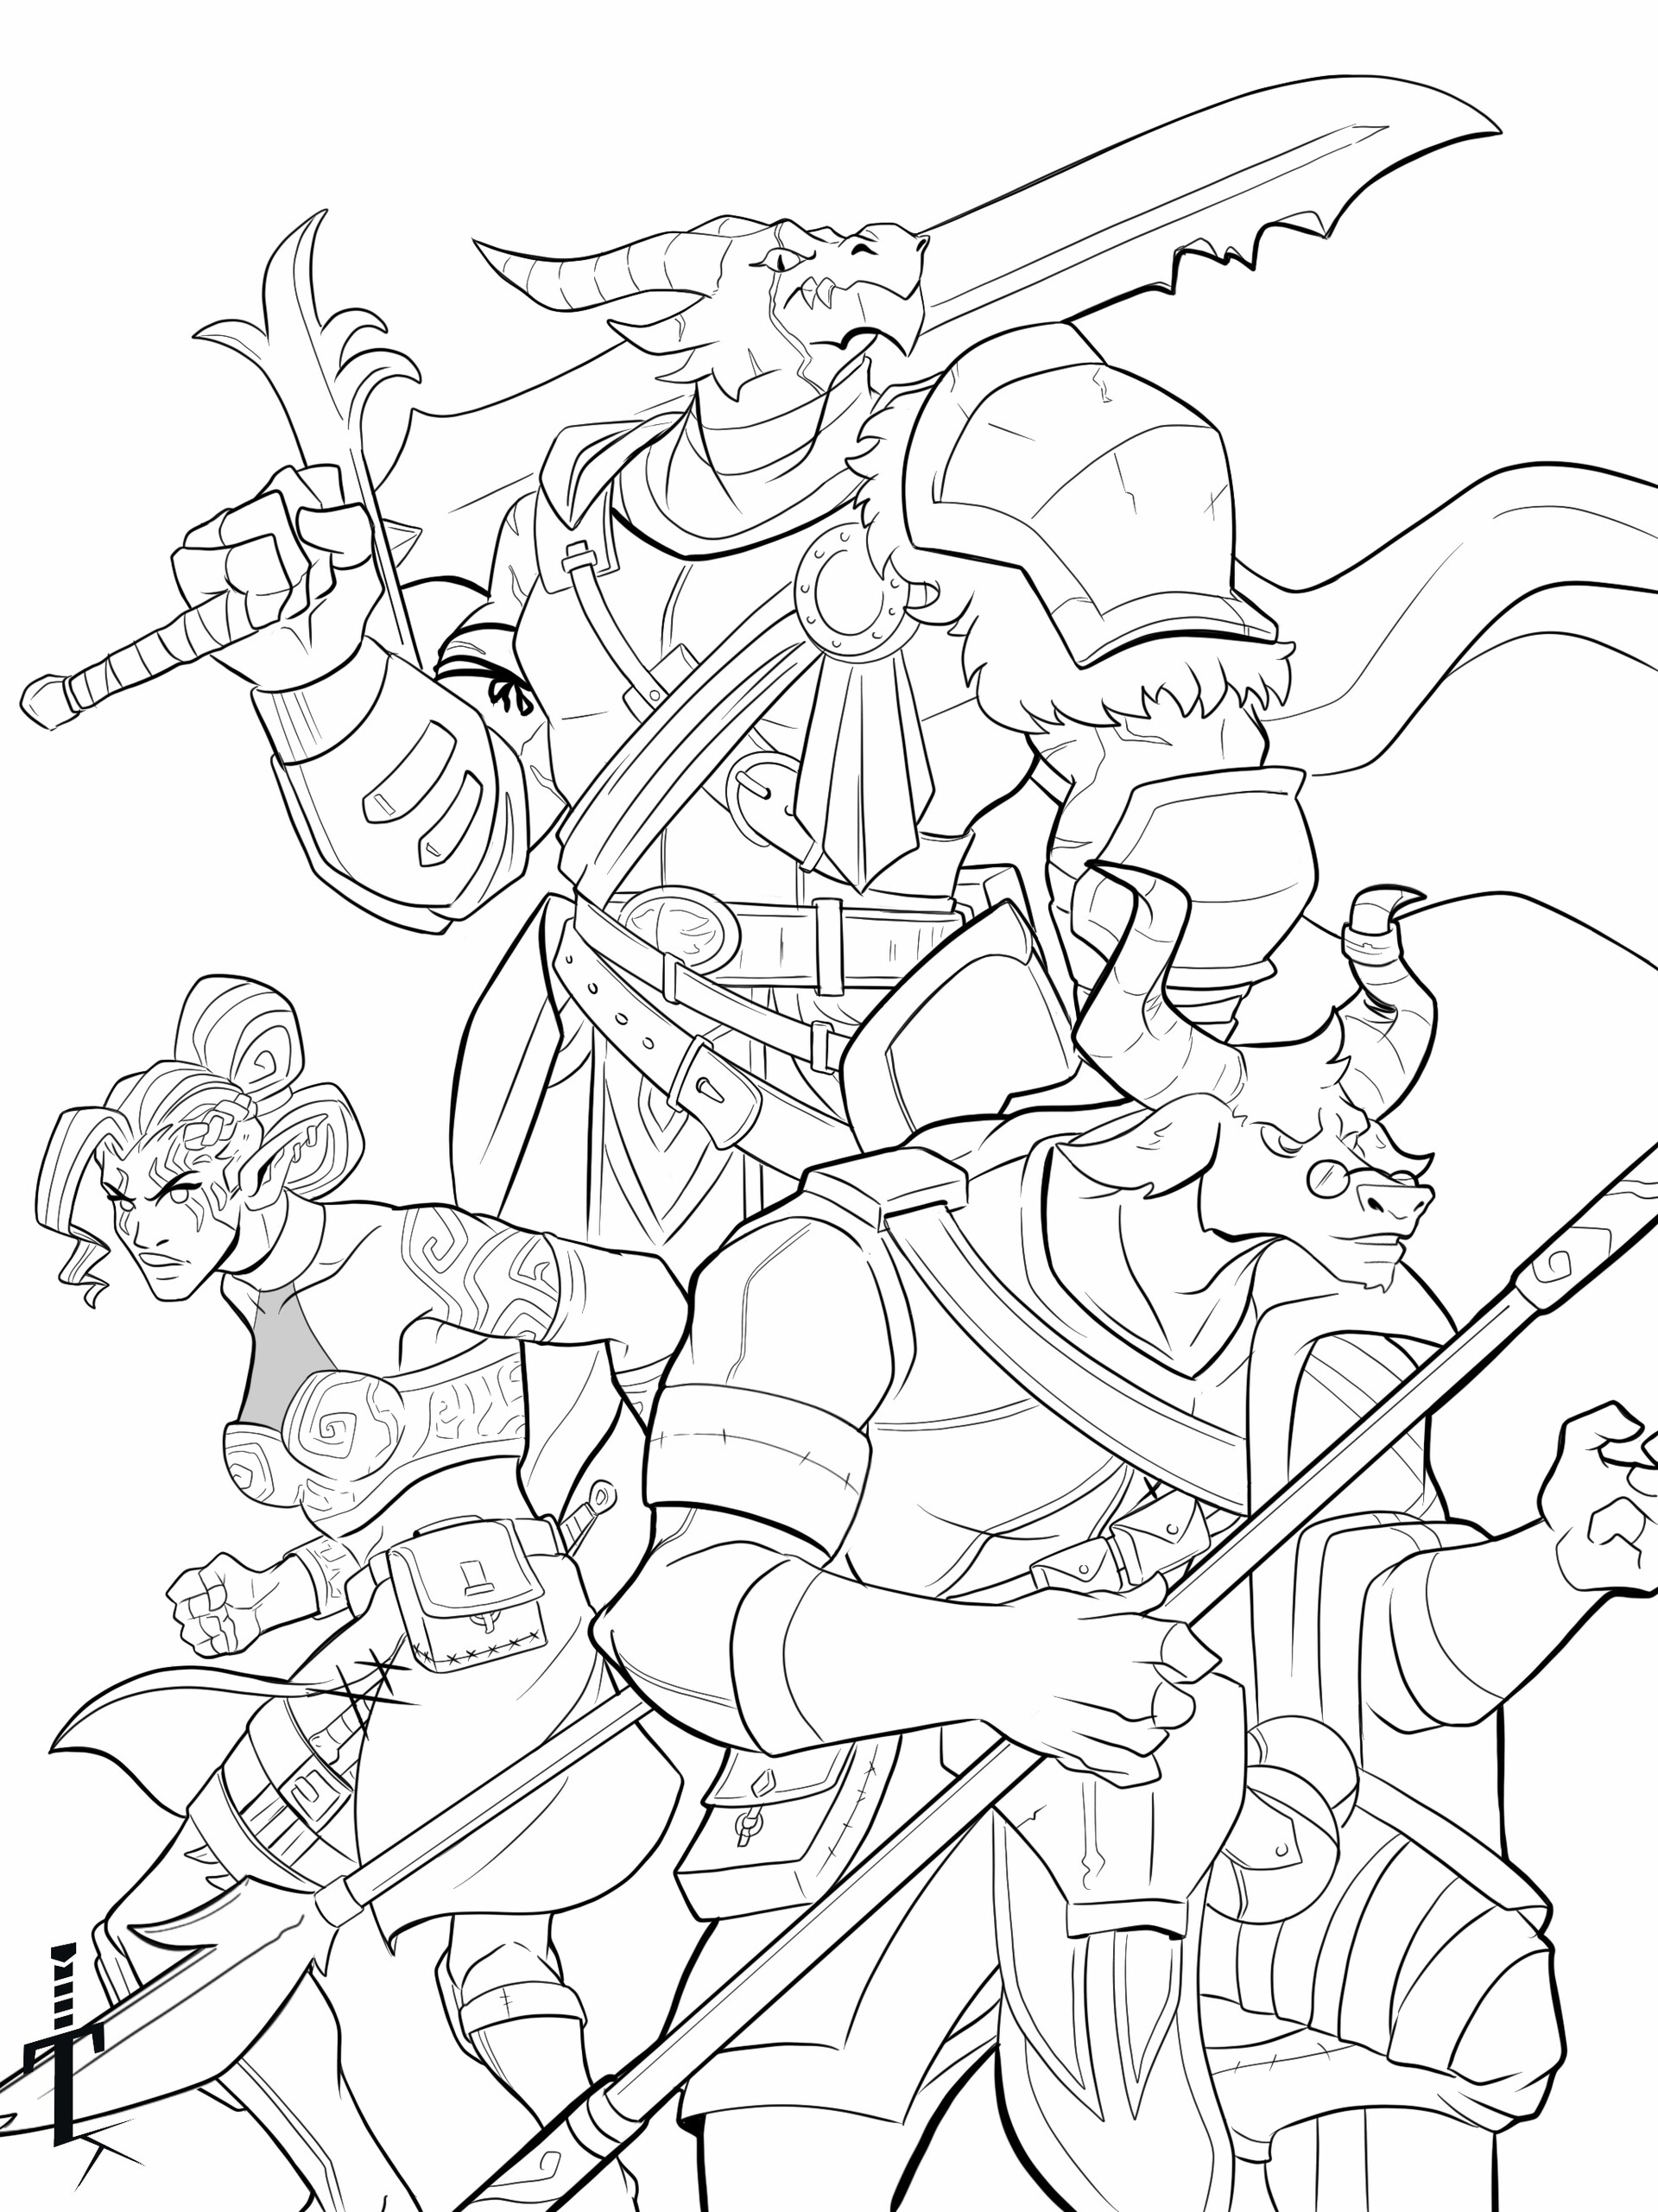 ArtStation - Dnd Coloring page commission- Minotaur and friends